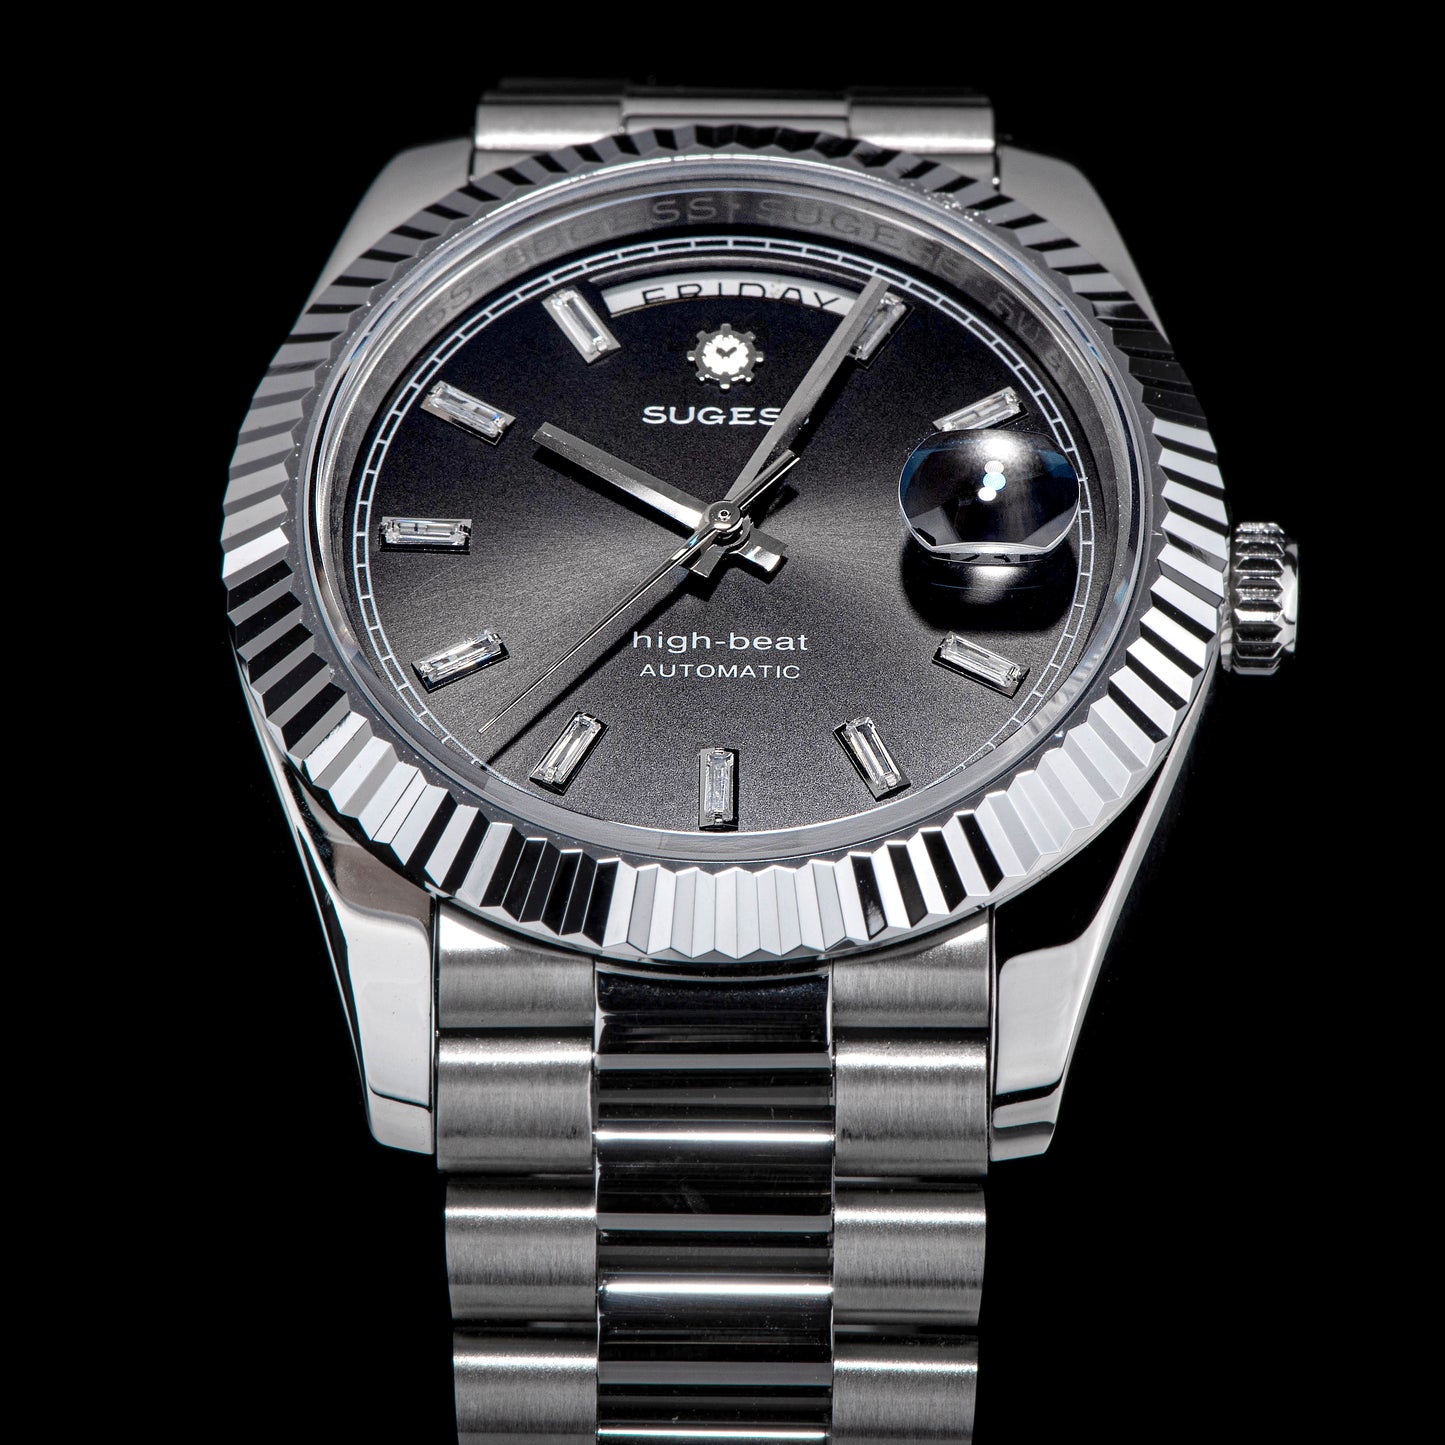 Heritage S433 DD Date and Day Display Stainless-Steel Automatic